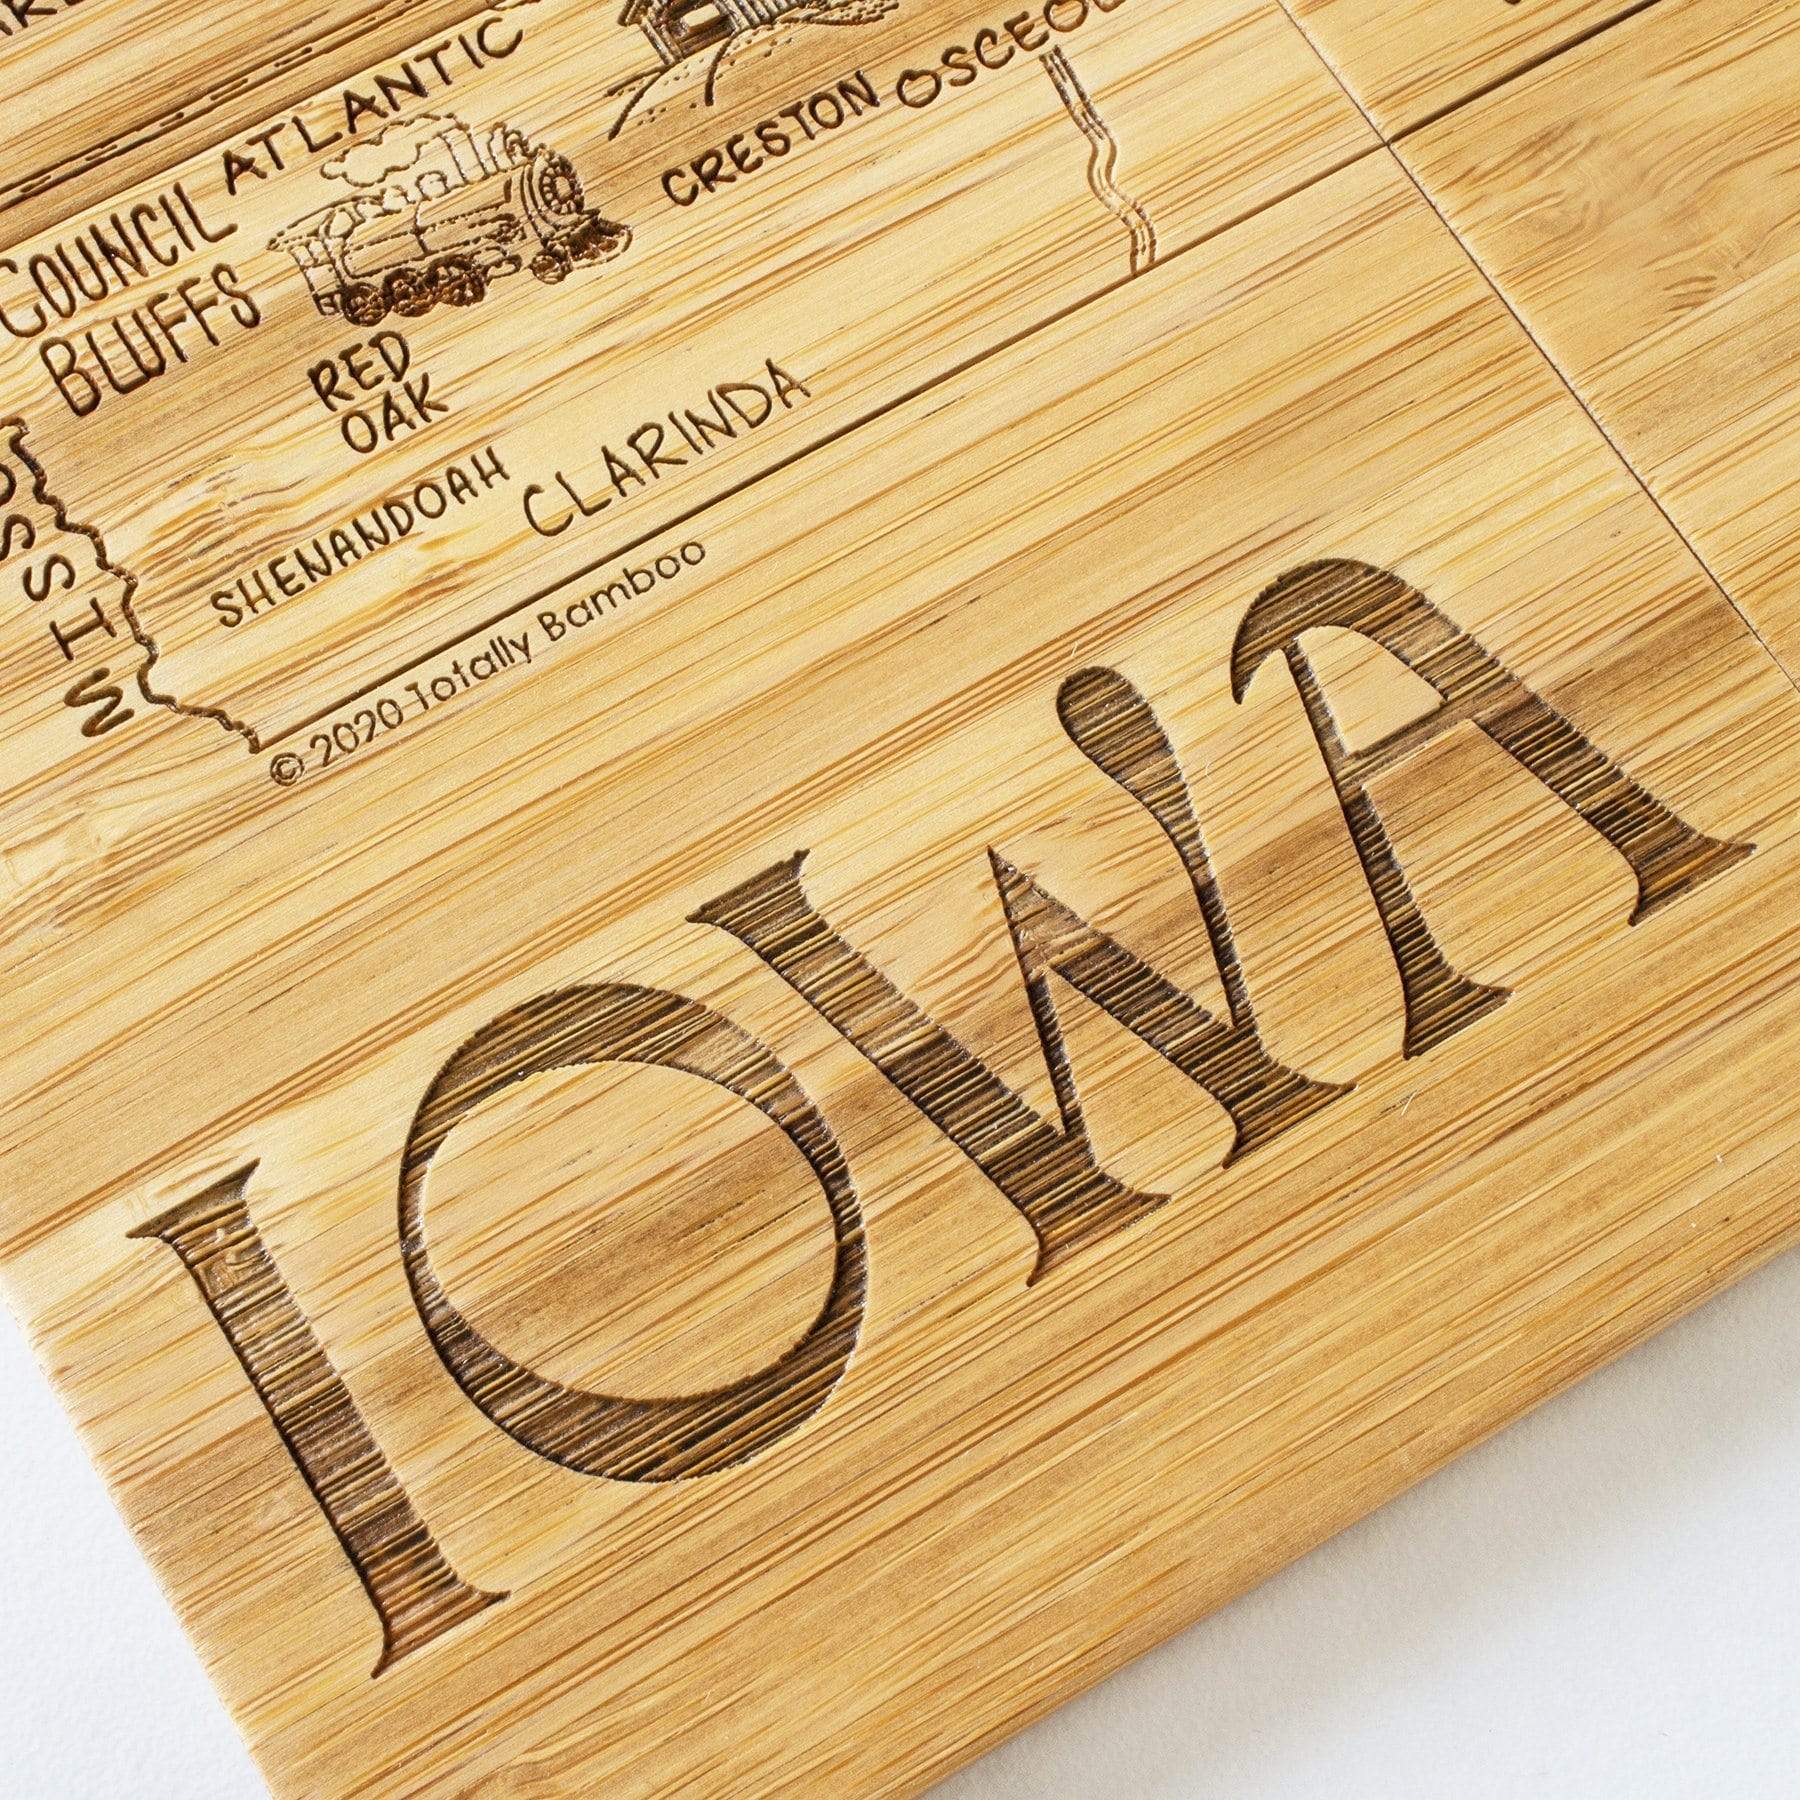 Totally Bamboo Iowa State Puzzle 4 Piece Bamboo Coaster Set with Case